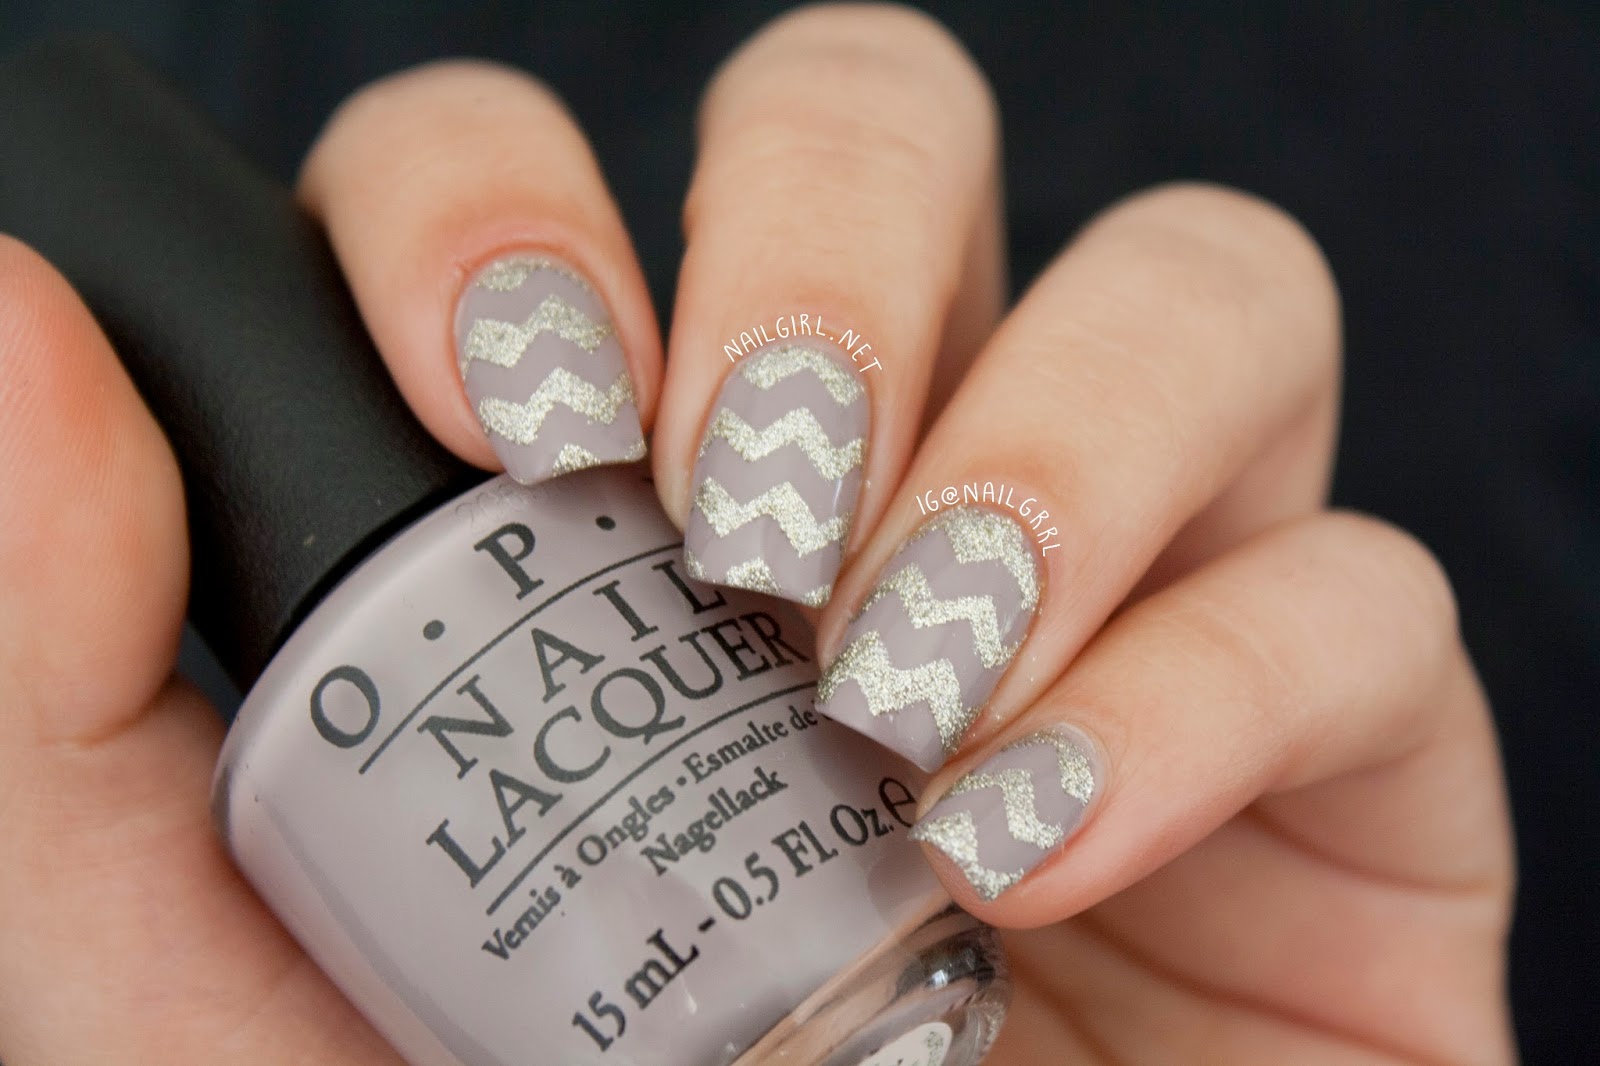 4. OPI Nail Lacquer in "Taupe-less Beach" - wide 3